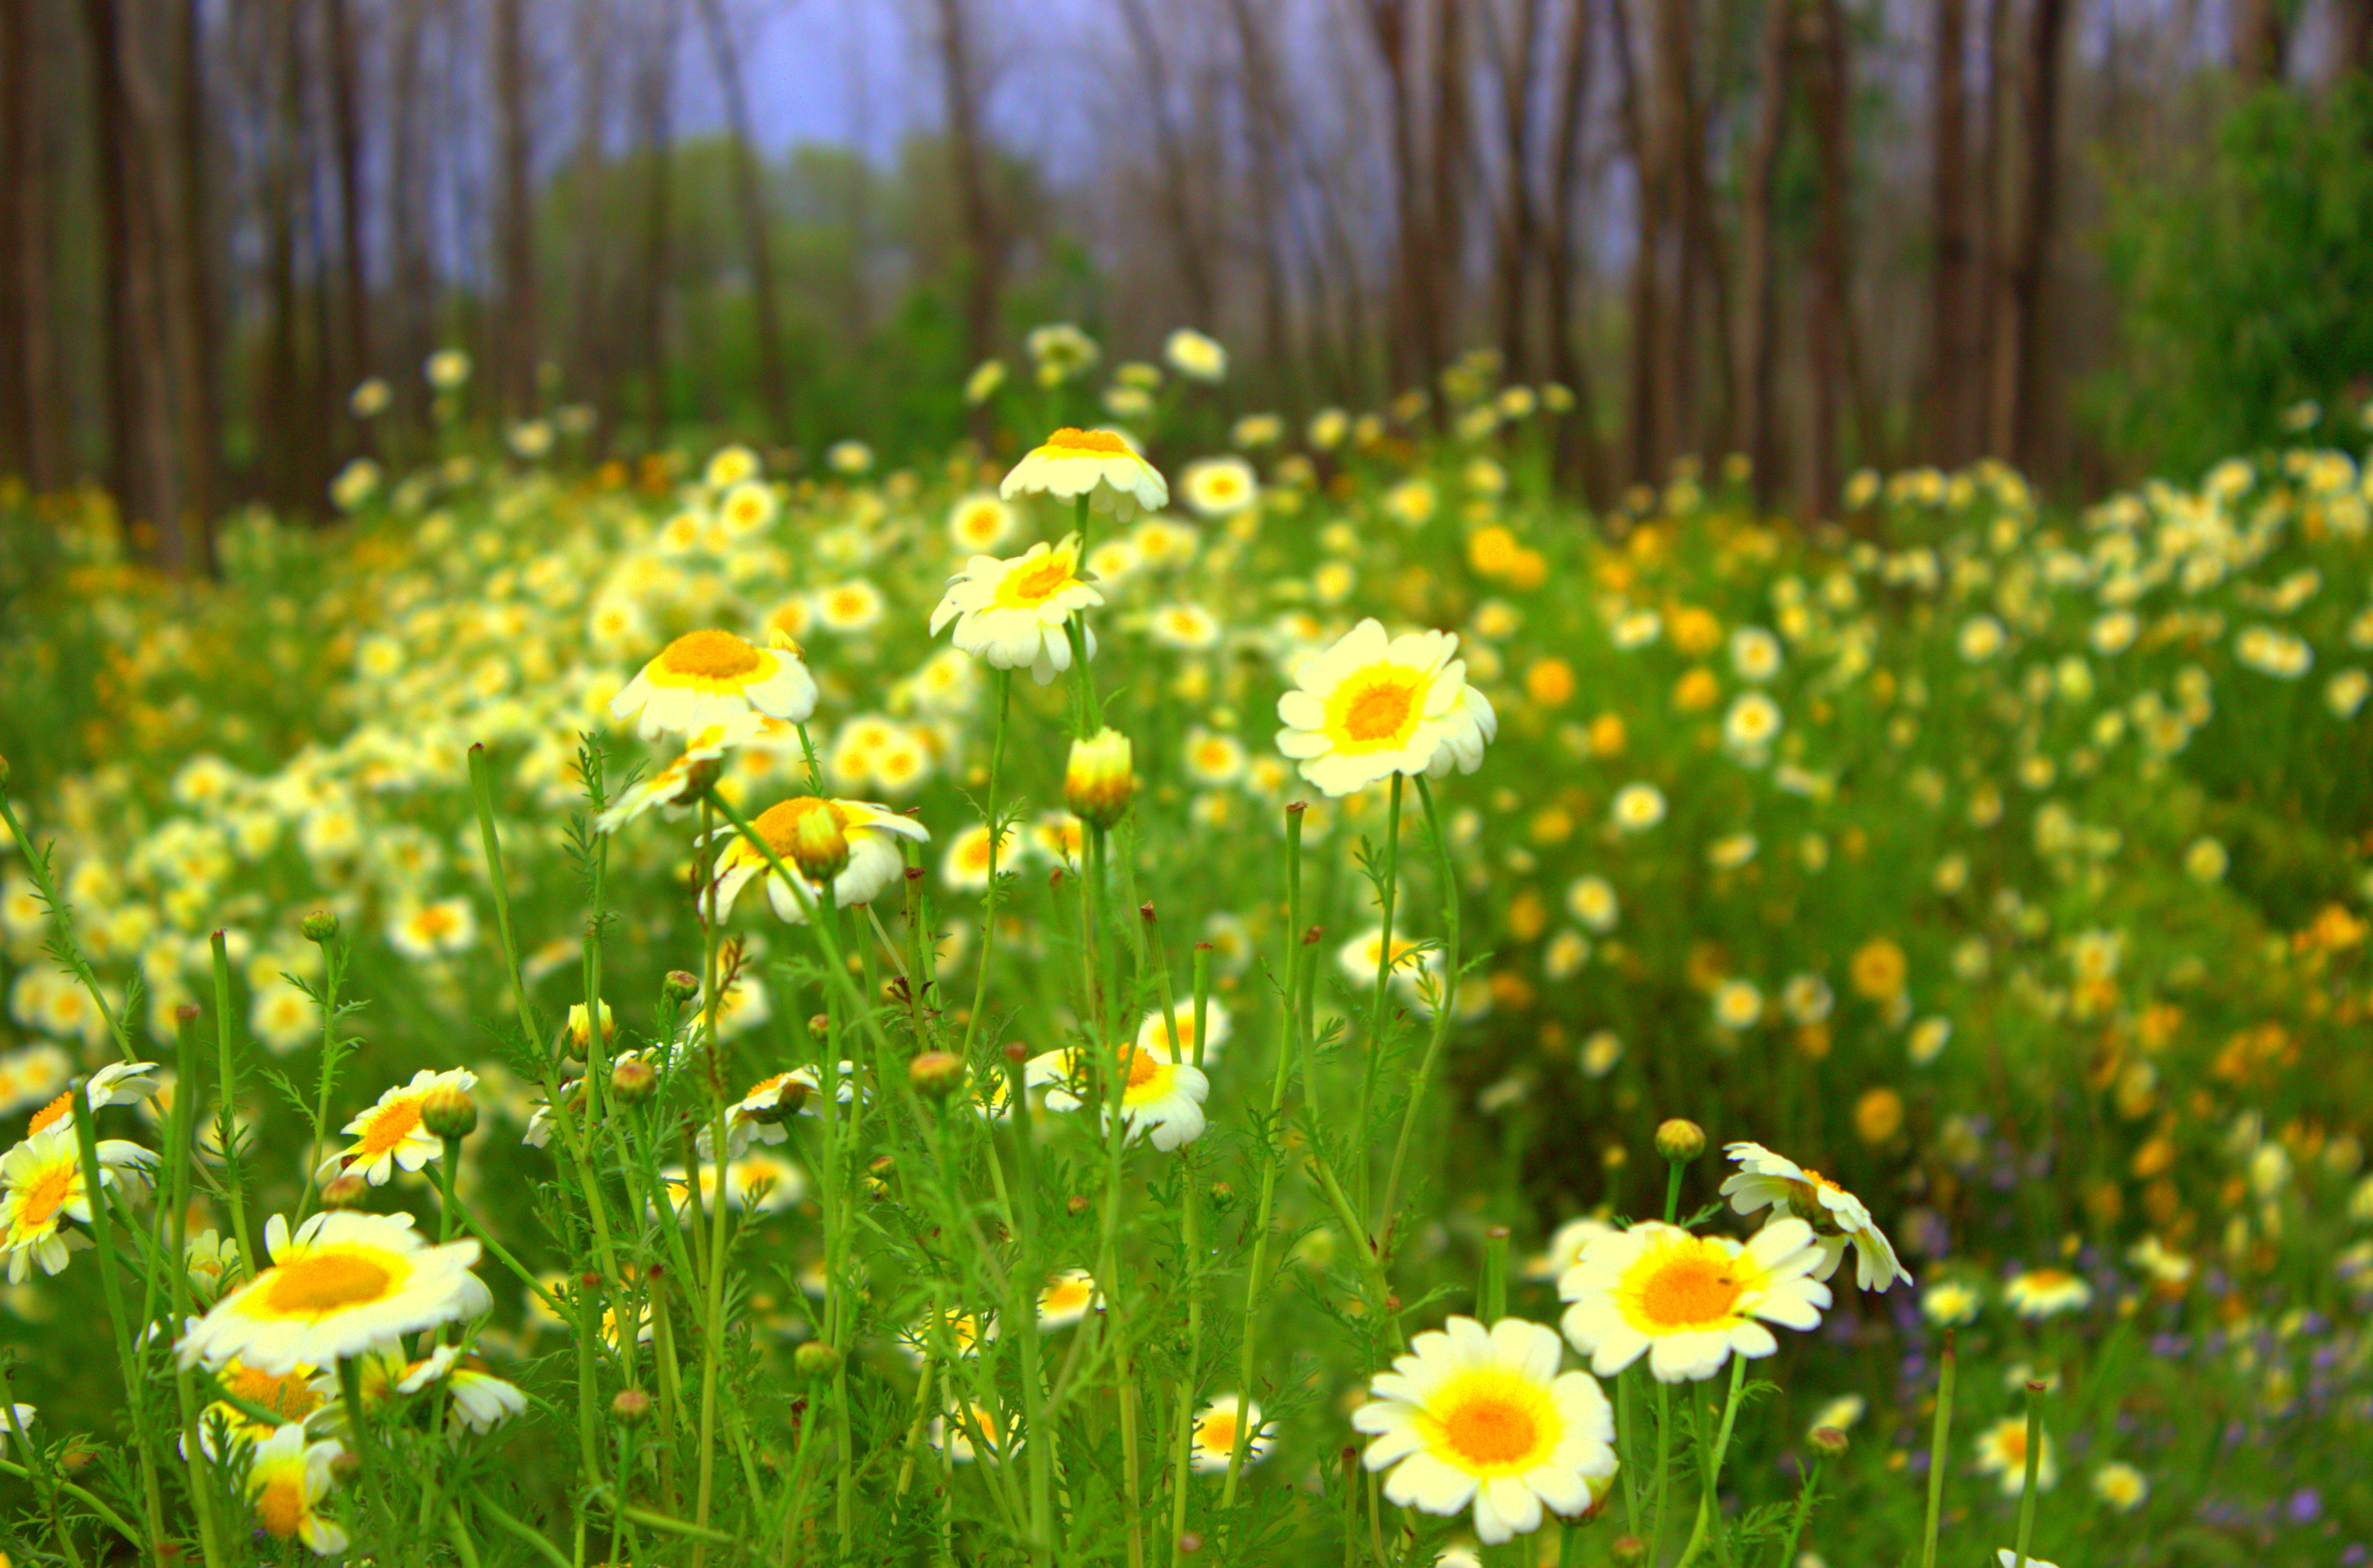 Free photo: Fields of flowers - Bloom, Closeup, Color ...